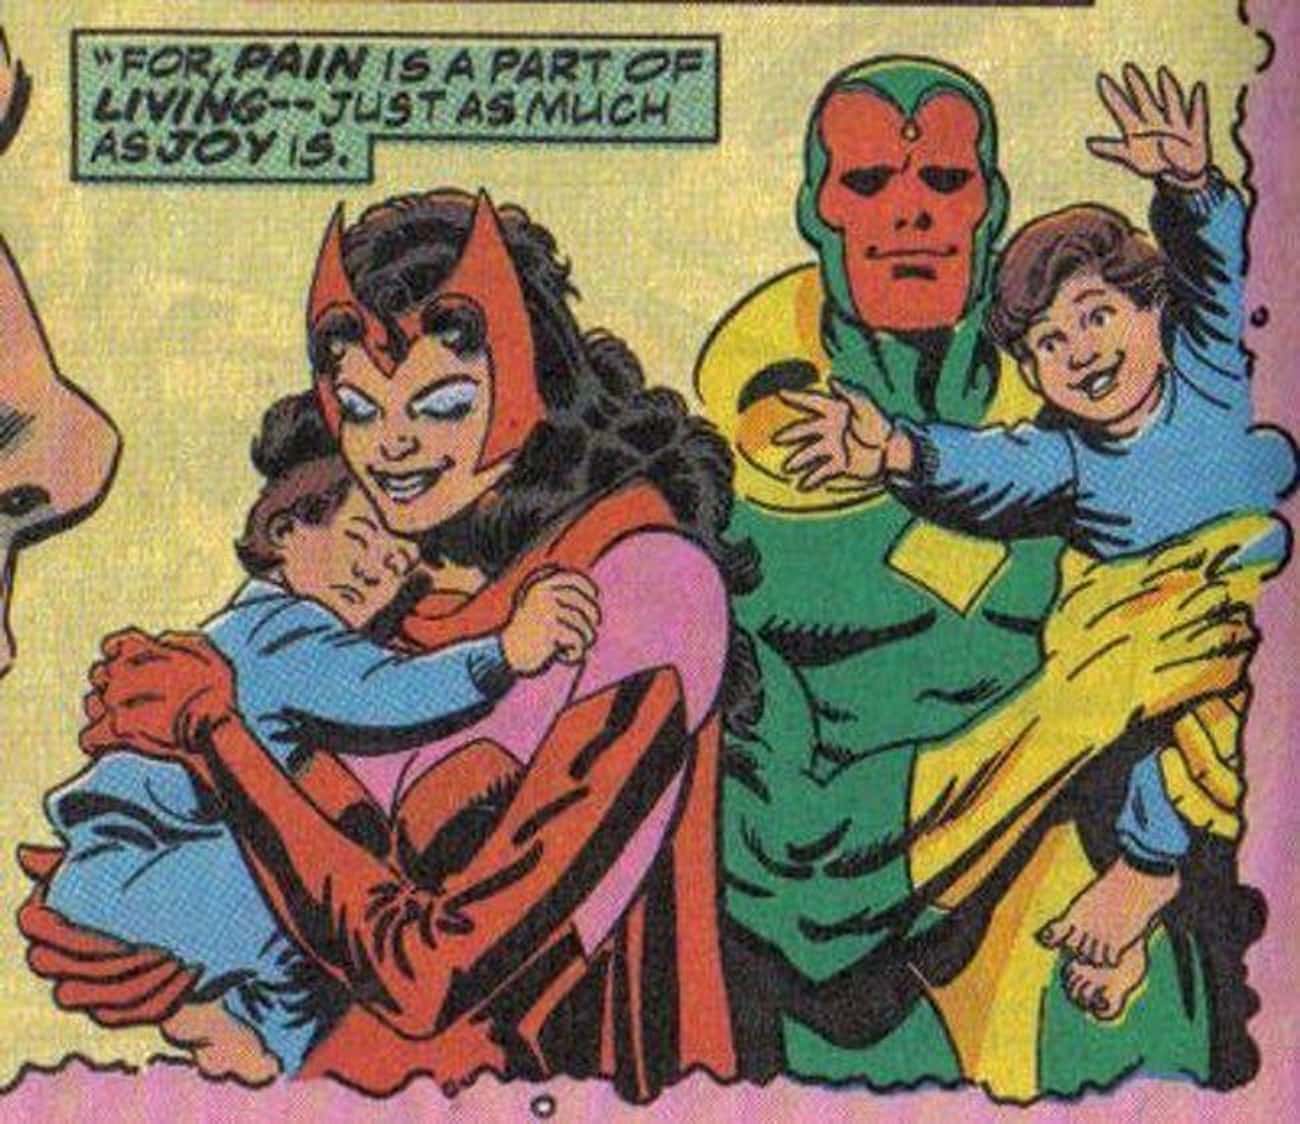 It Is Generally Believed That The Scarlet Witch Manifested The Children With Her Own Magical Abilities - But The Devil Is In The Details